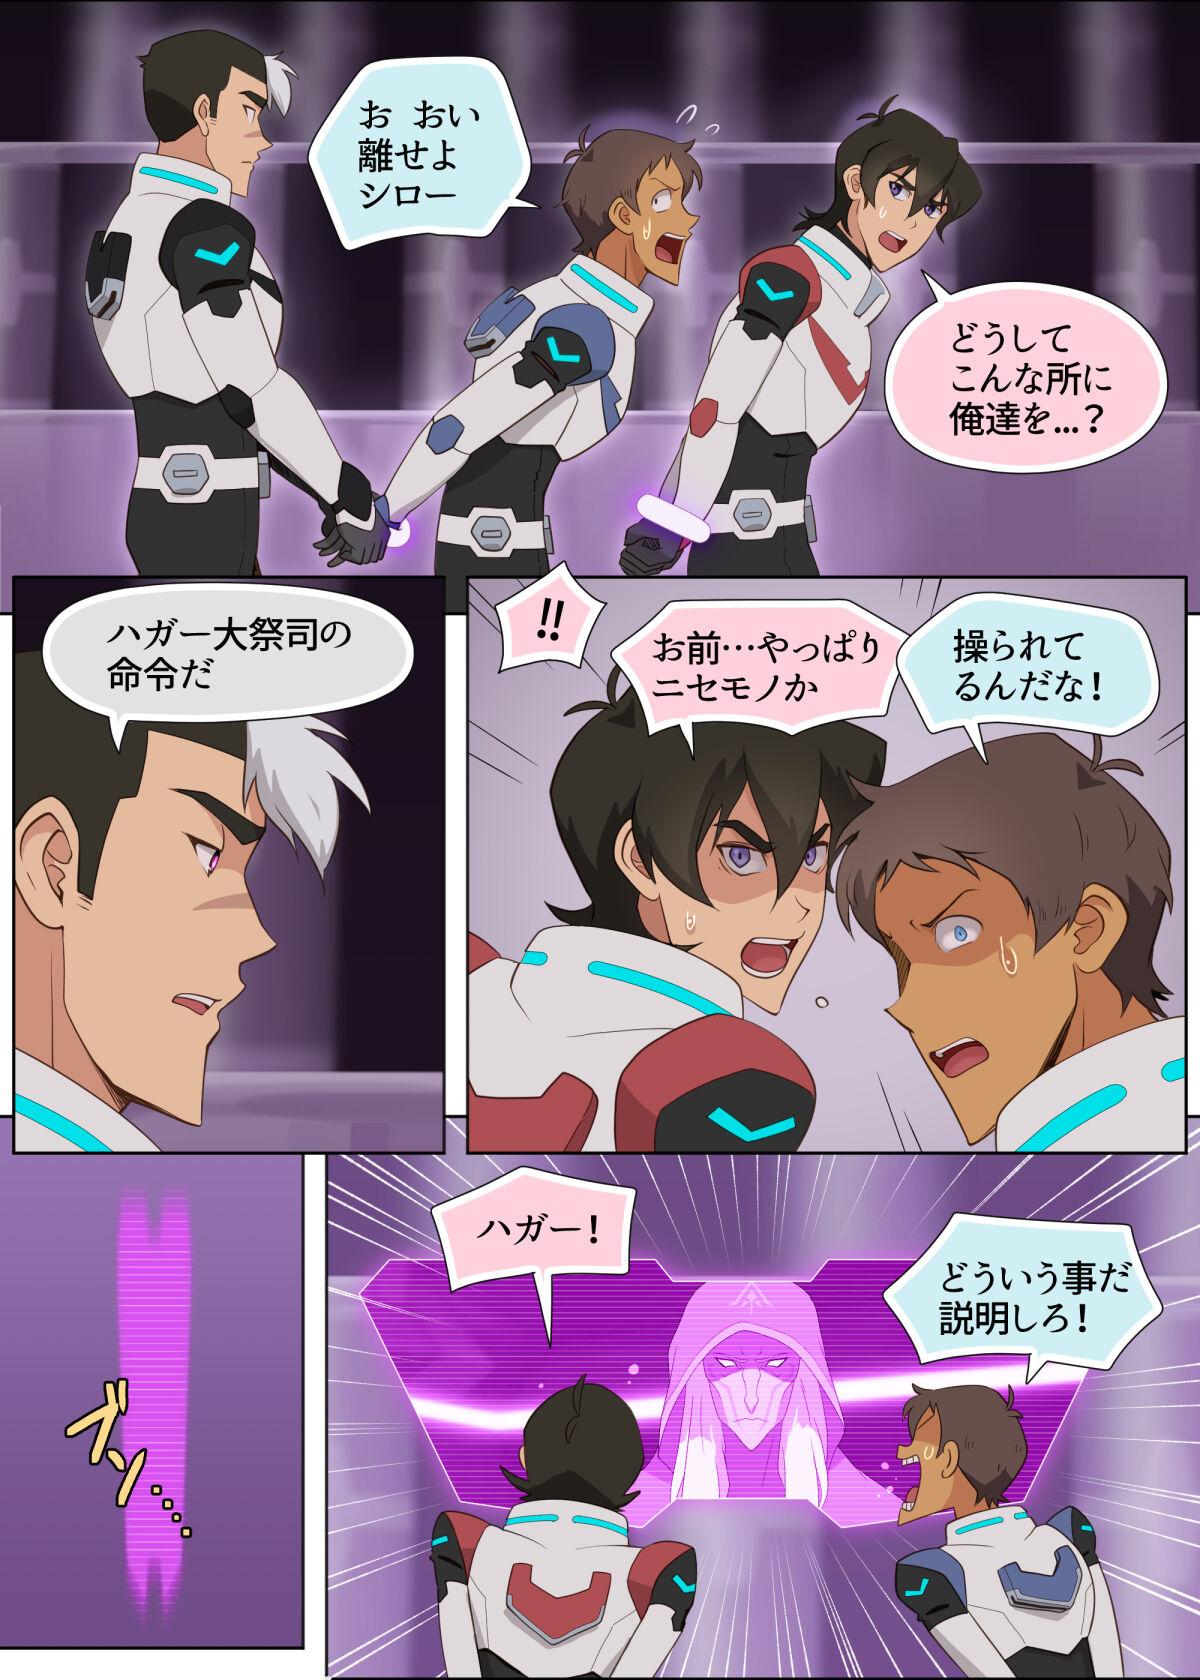 Tits ハガー様のおもちゃ! - Voltron Camgirl - Page 3